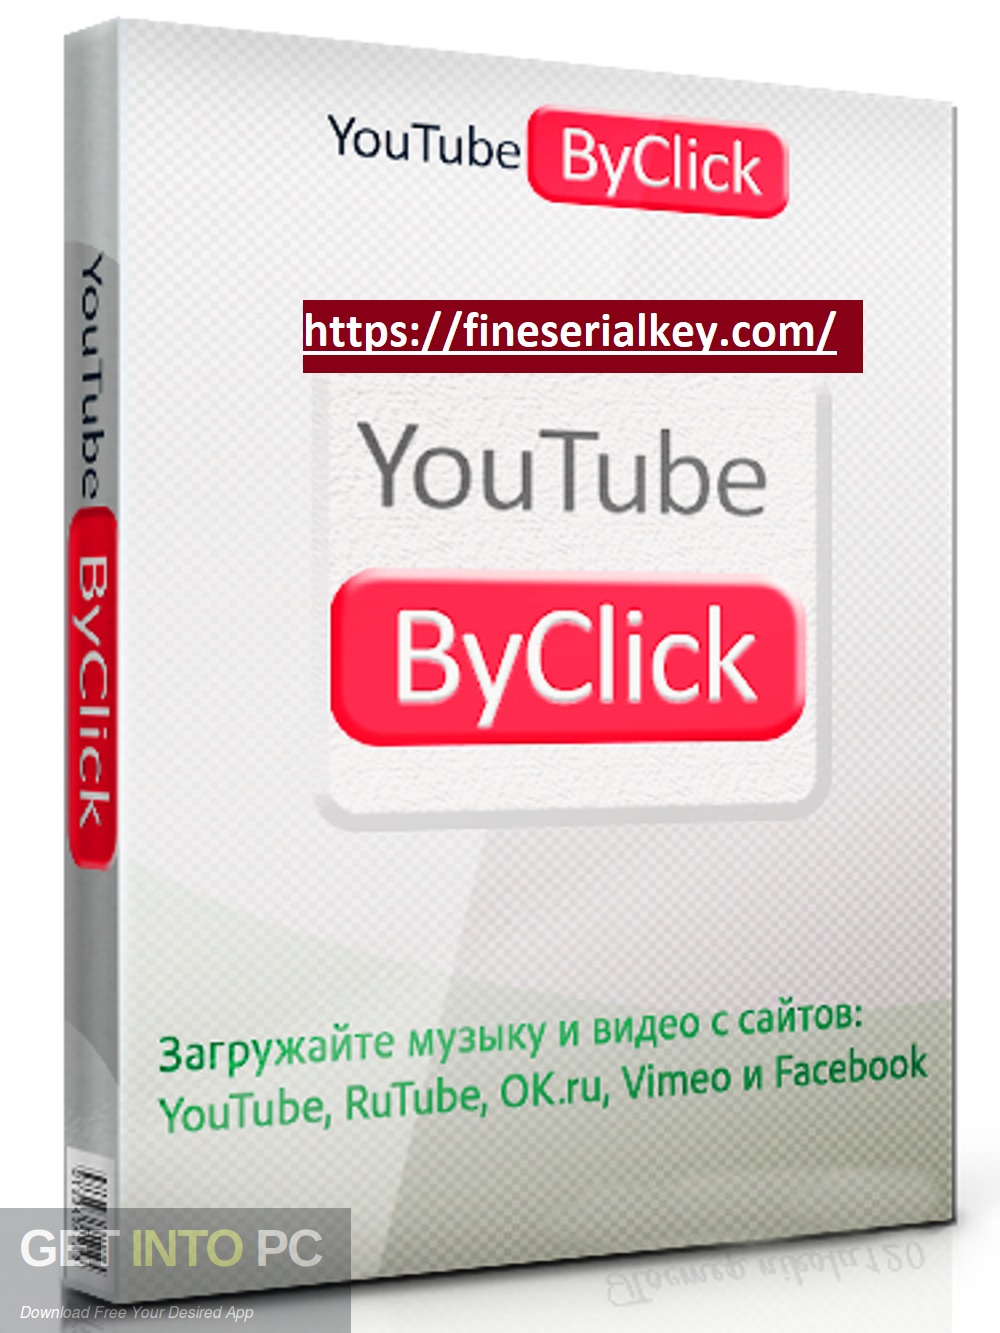 crack youtube by click 2.2.99